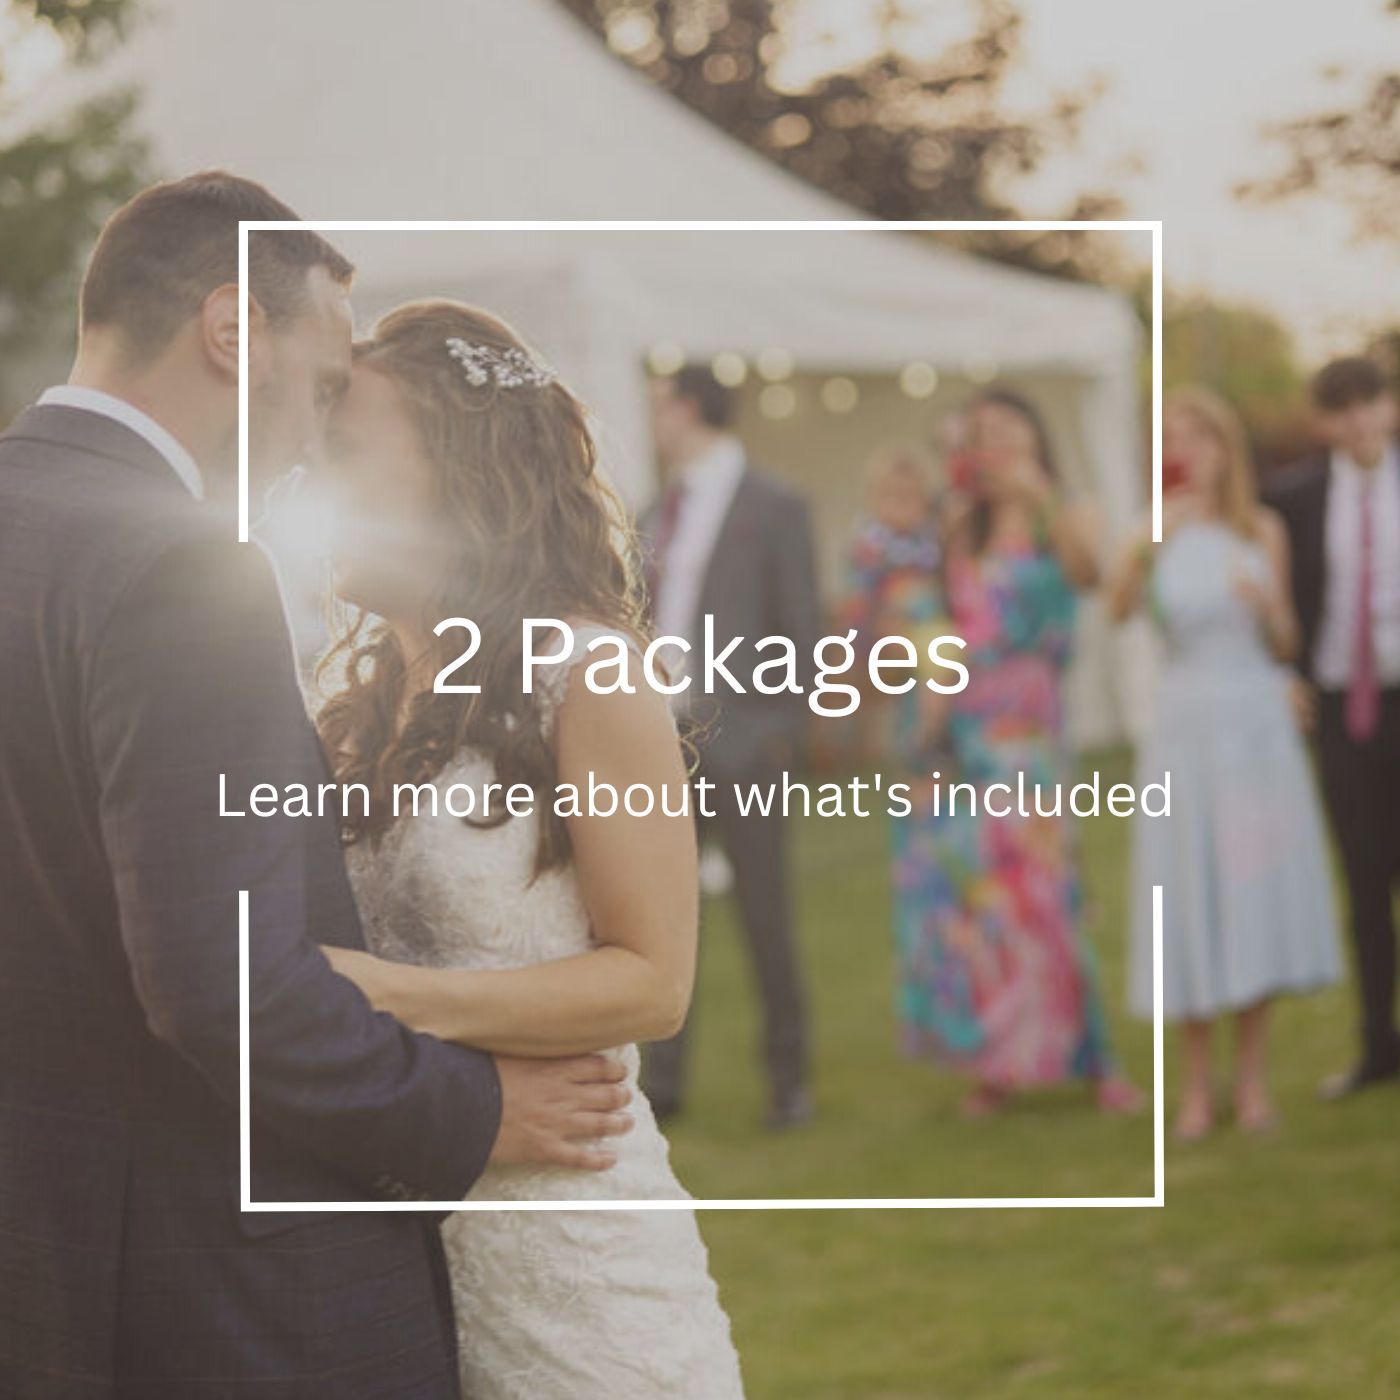 Learn more about our packages and see what's included.